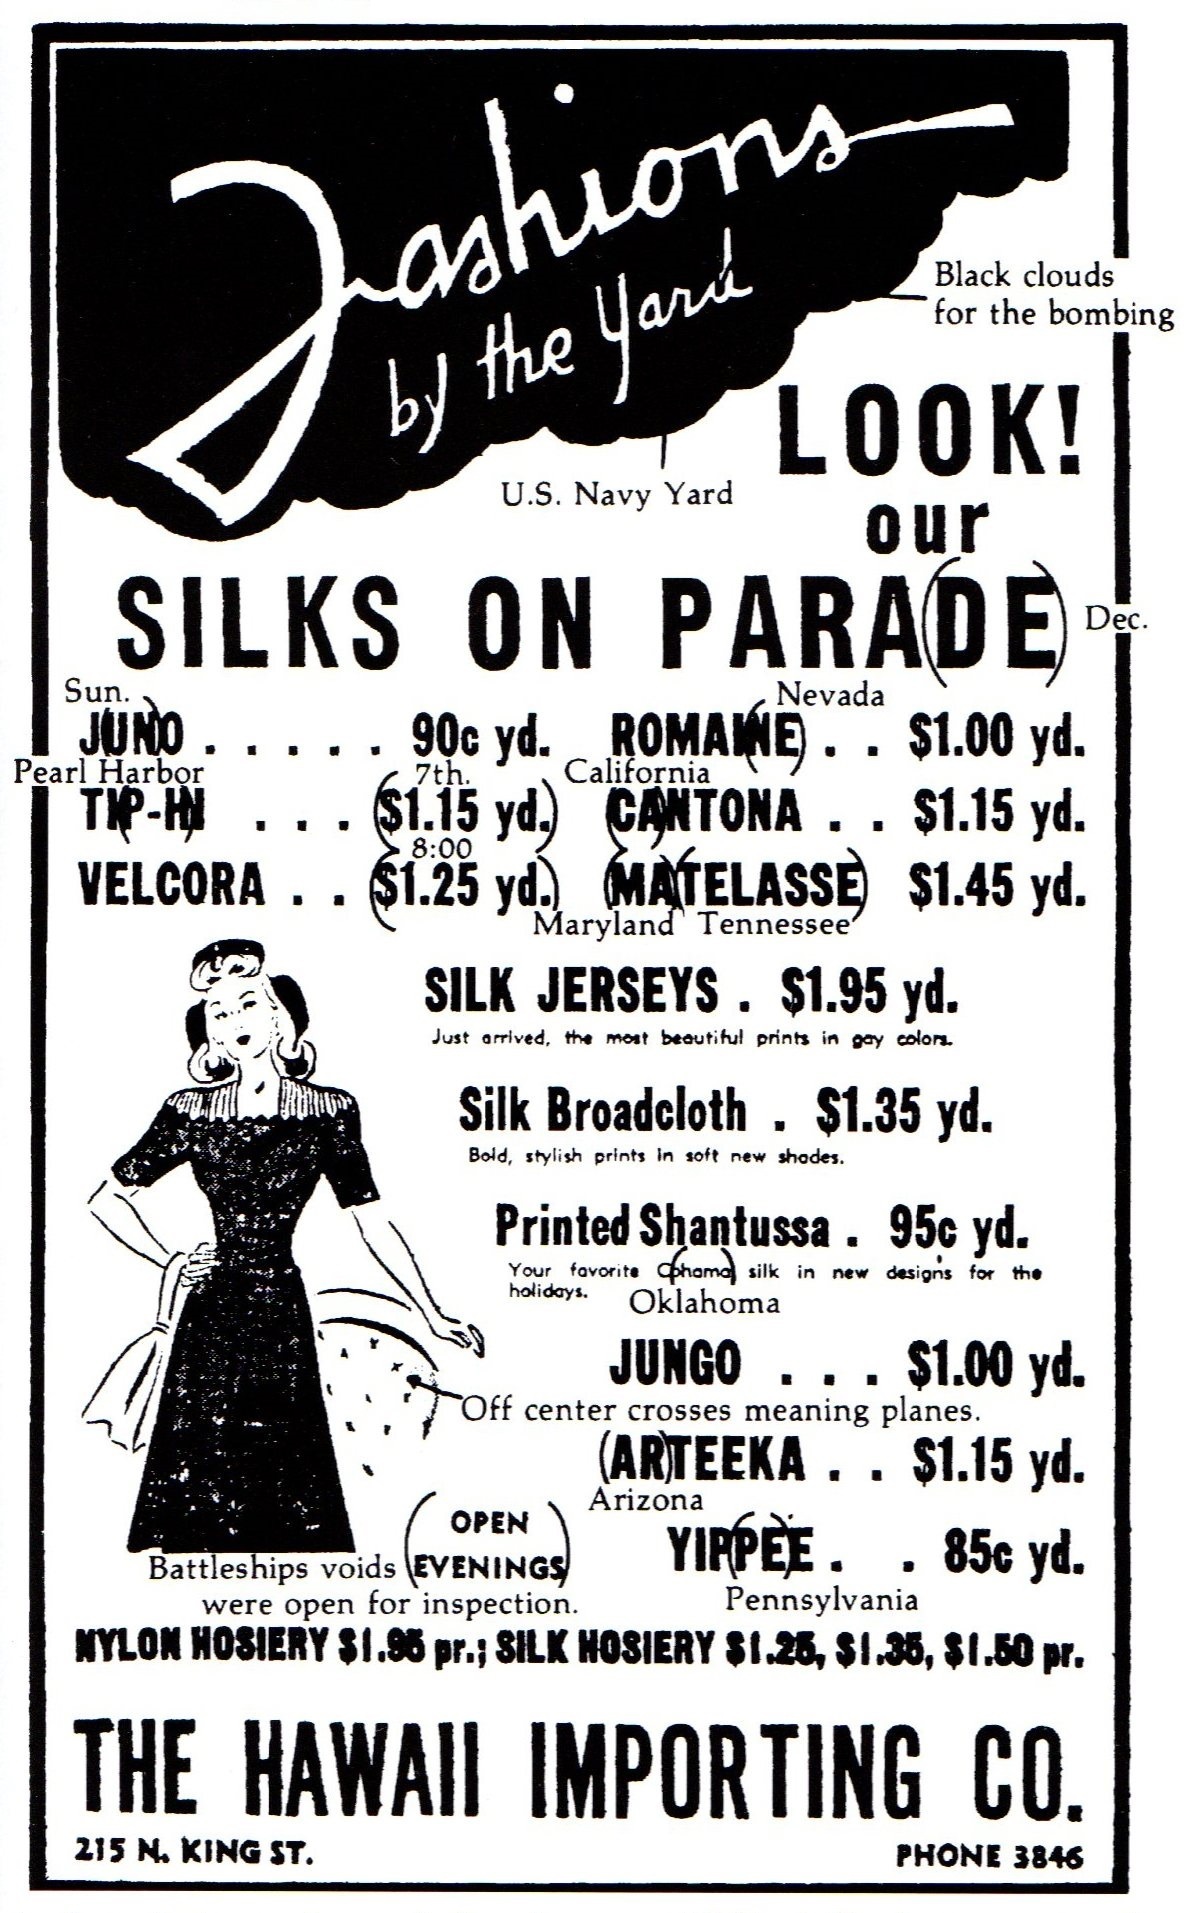 Advertisement for silk fabrics that appeared in two Honolulu newspapers 3 Dec 1941, four days before the attack. This ad was said to have coded messages alerting Japanese residents in Hawaii. This copy has been “decoded”